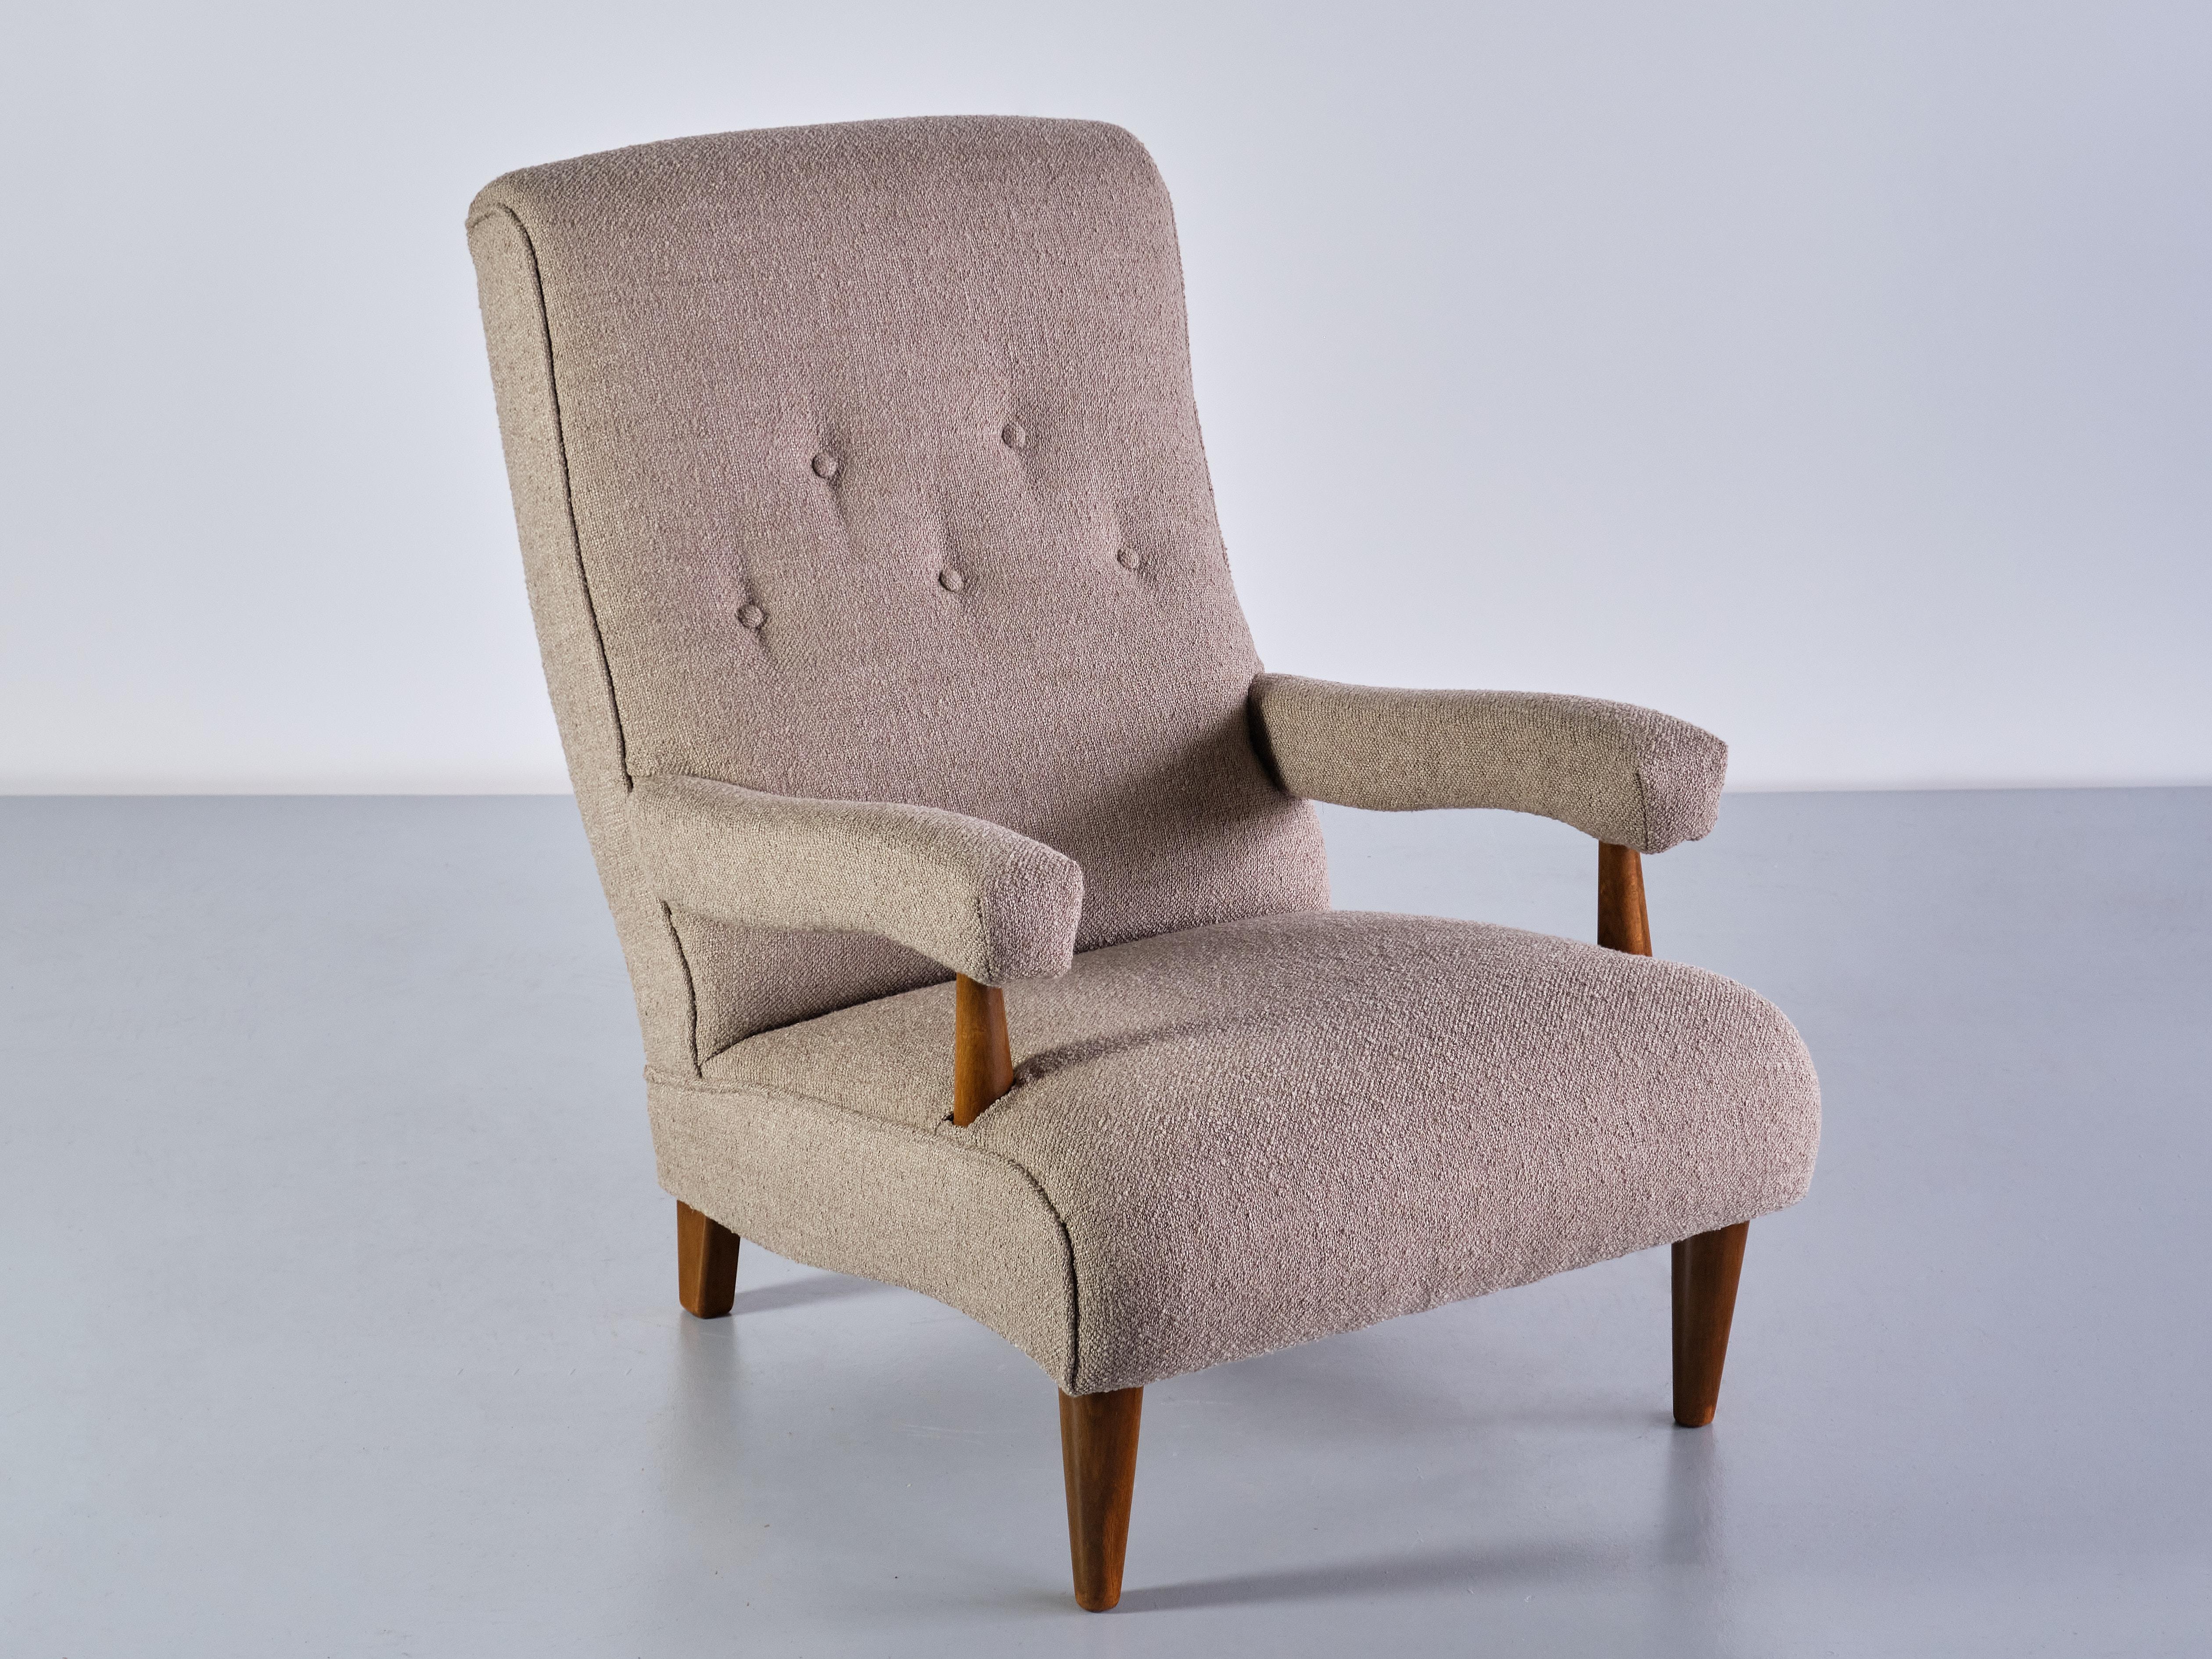 This rare armchair was designed by the Swedish designer Tage Westberg. This particular model was named 'Kapten Block' and it was produced by Westbergs Möbler in Sweden in the early 1960s.
The distinctive design is marked by the lines of the